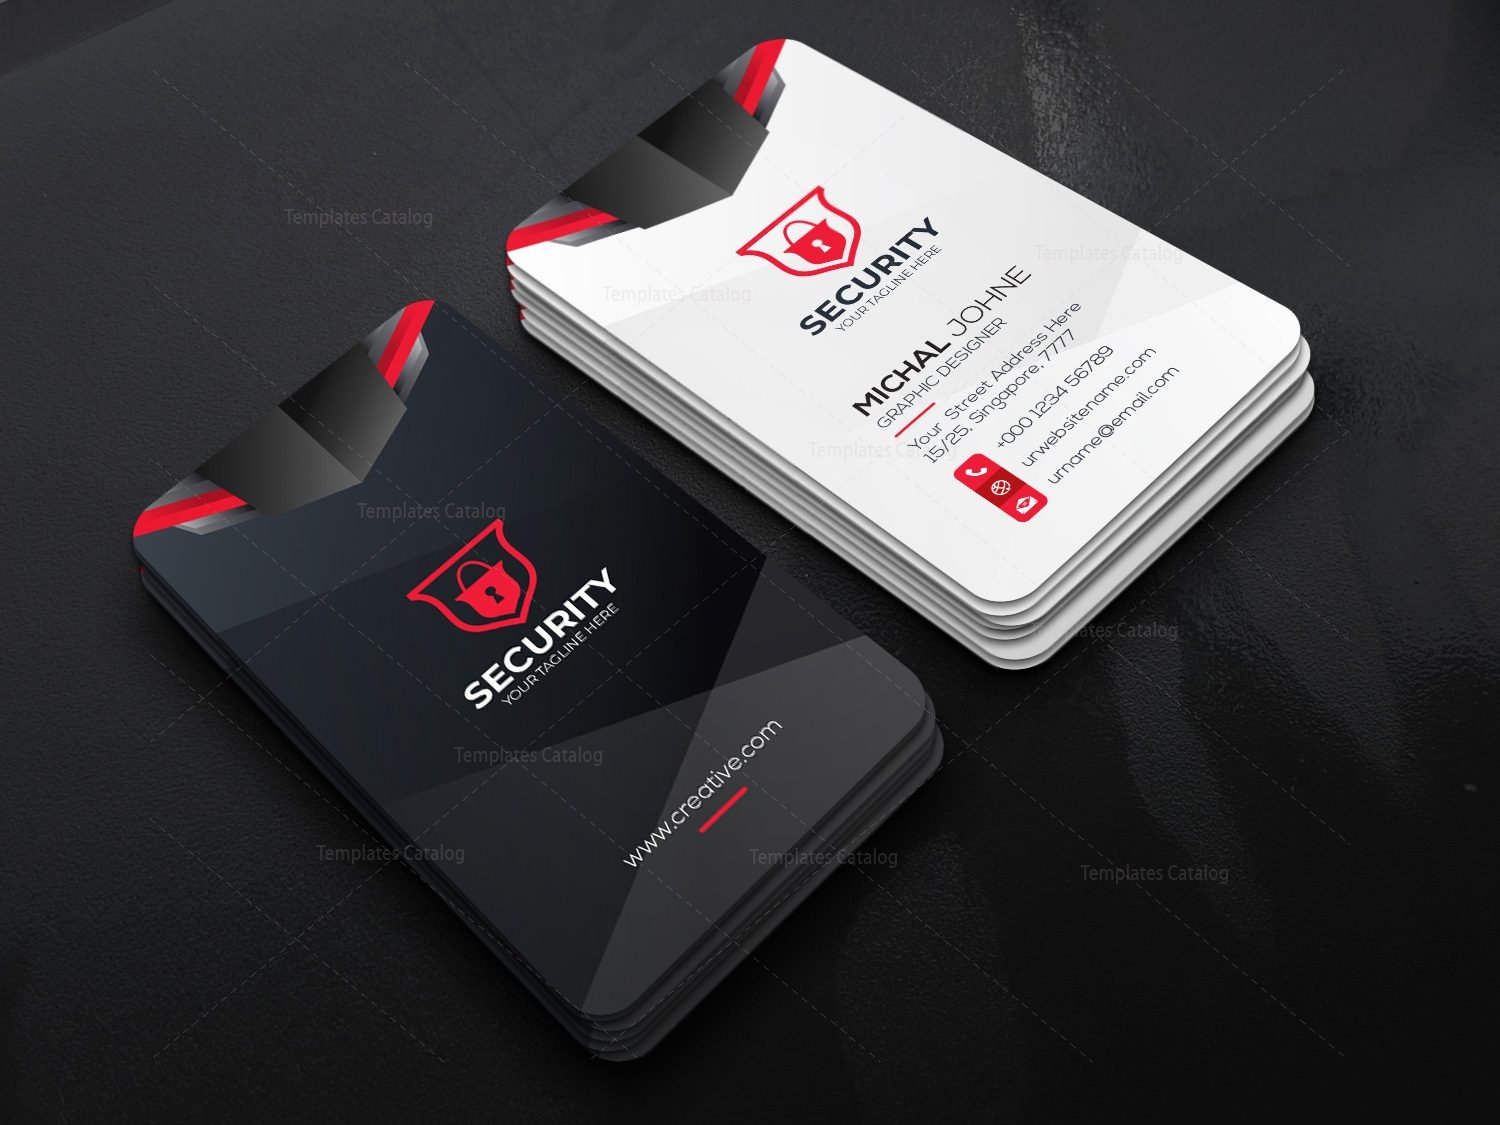 Security Company Vertical Business Card Design Template 22 Within Company Business Cards Templates